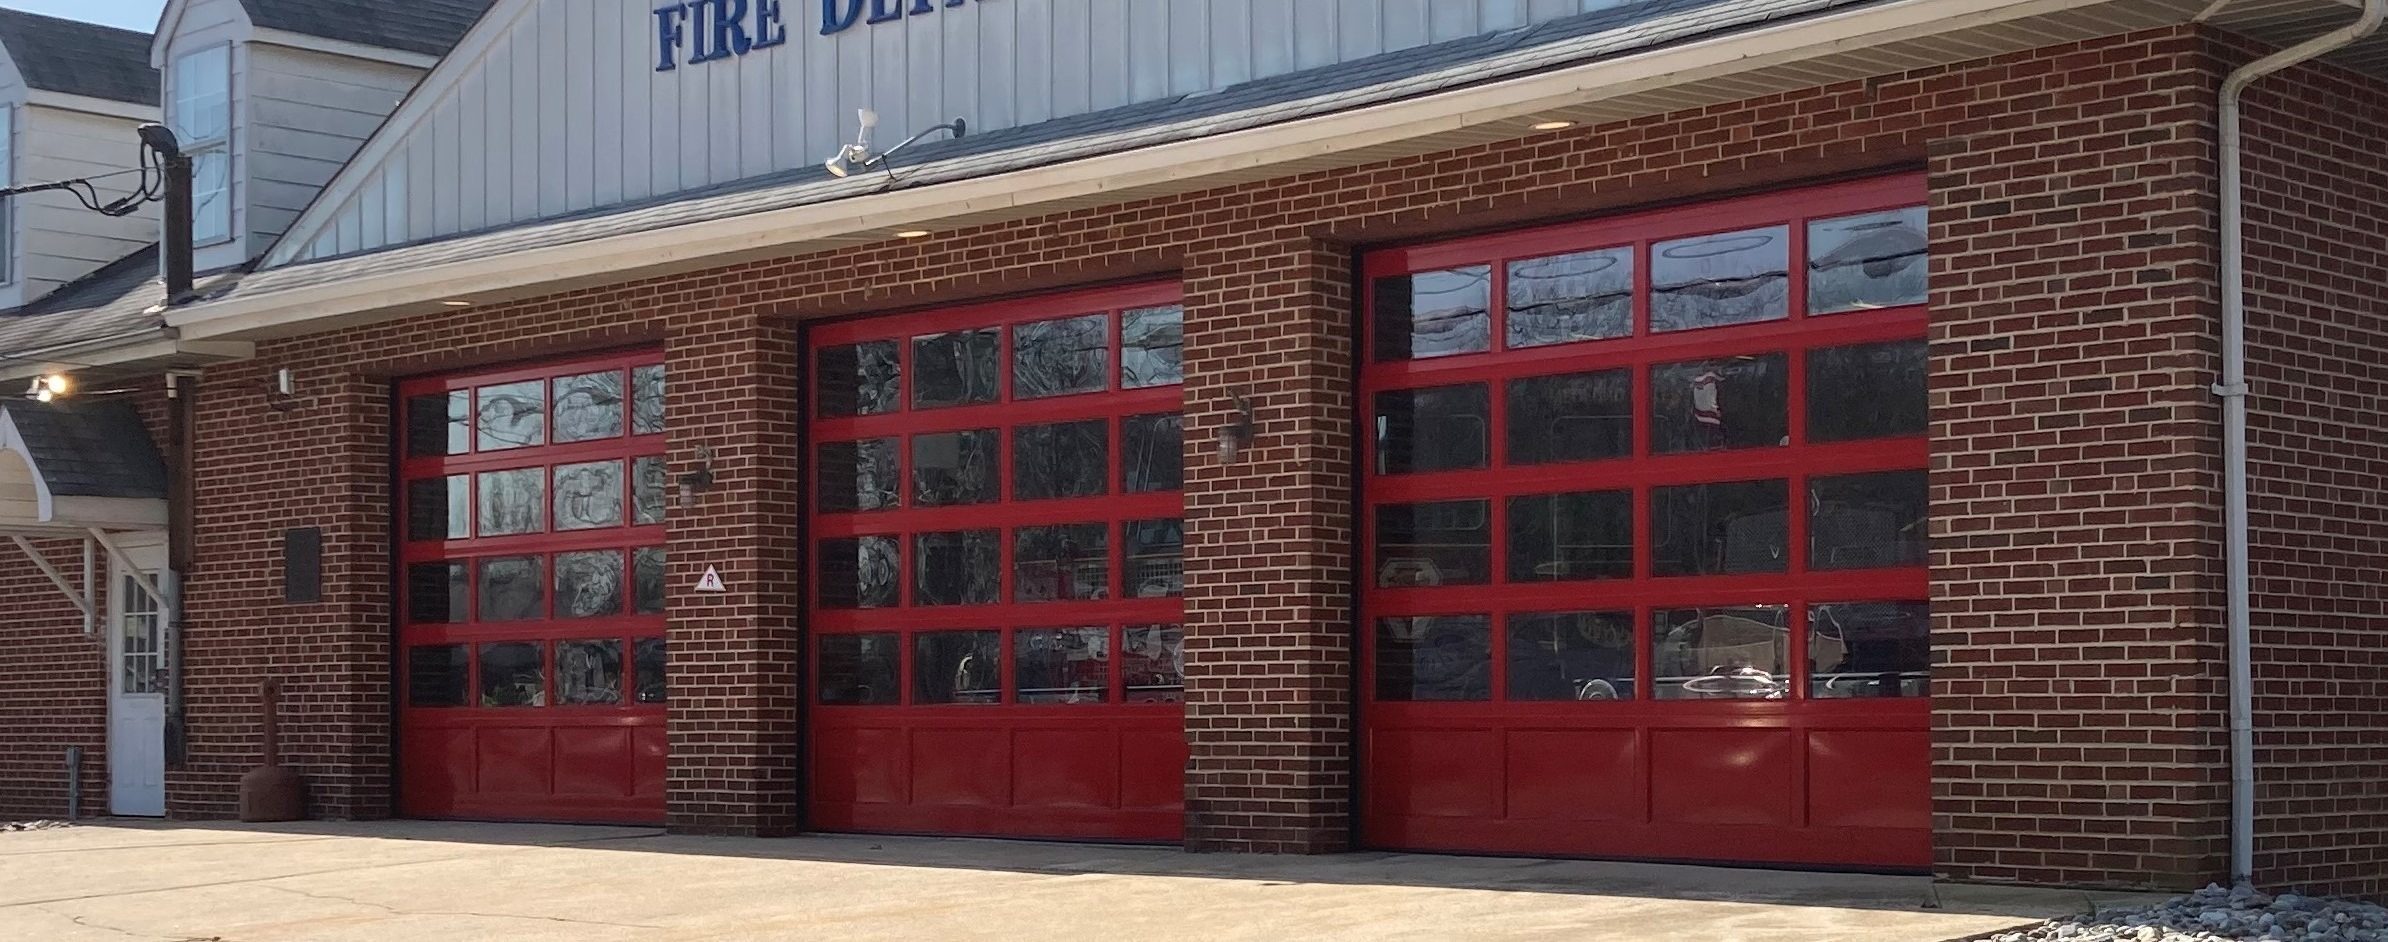 Fire house glass garage doors with red frame